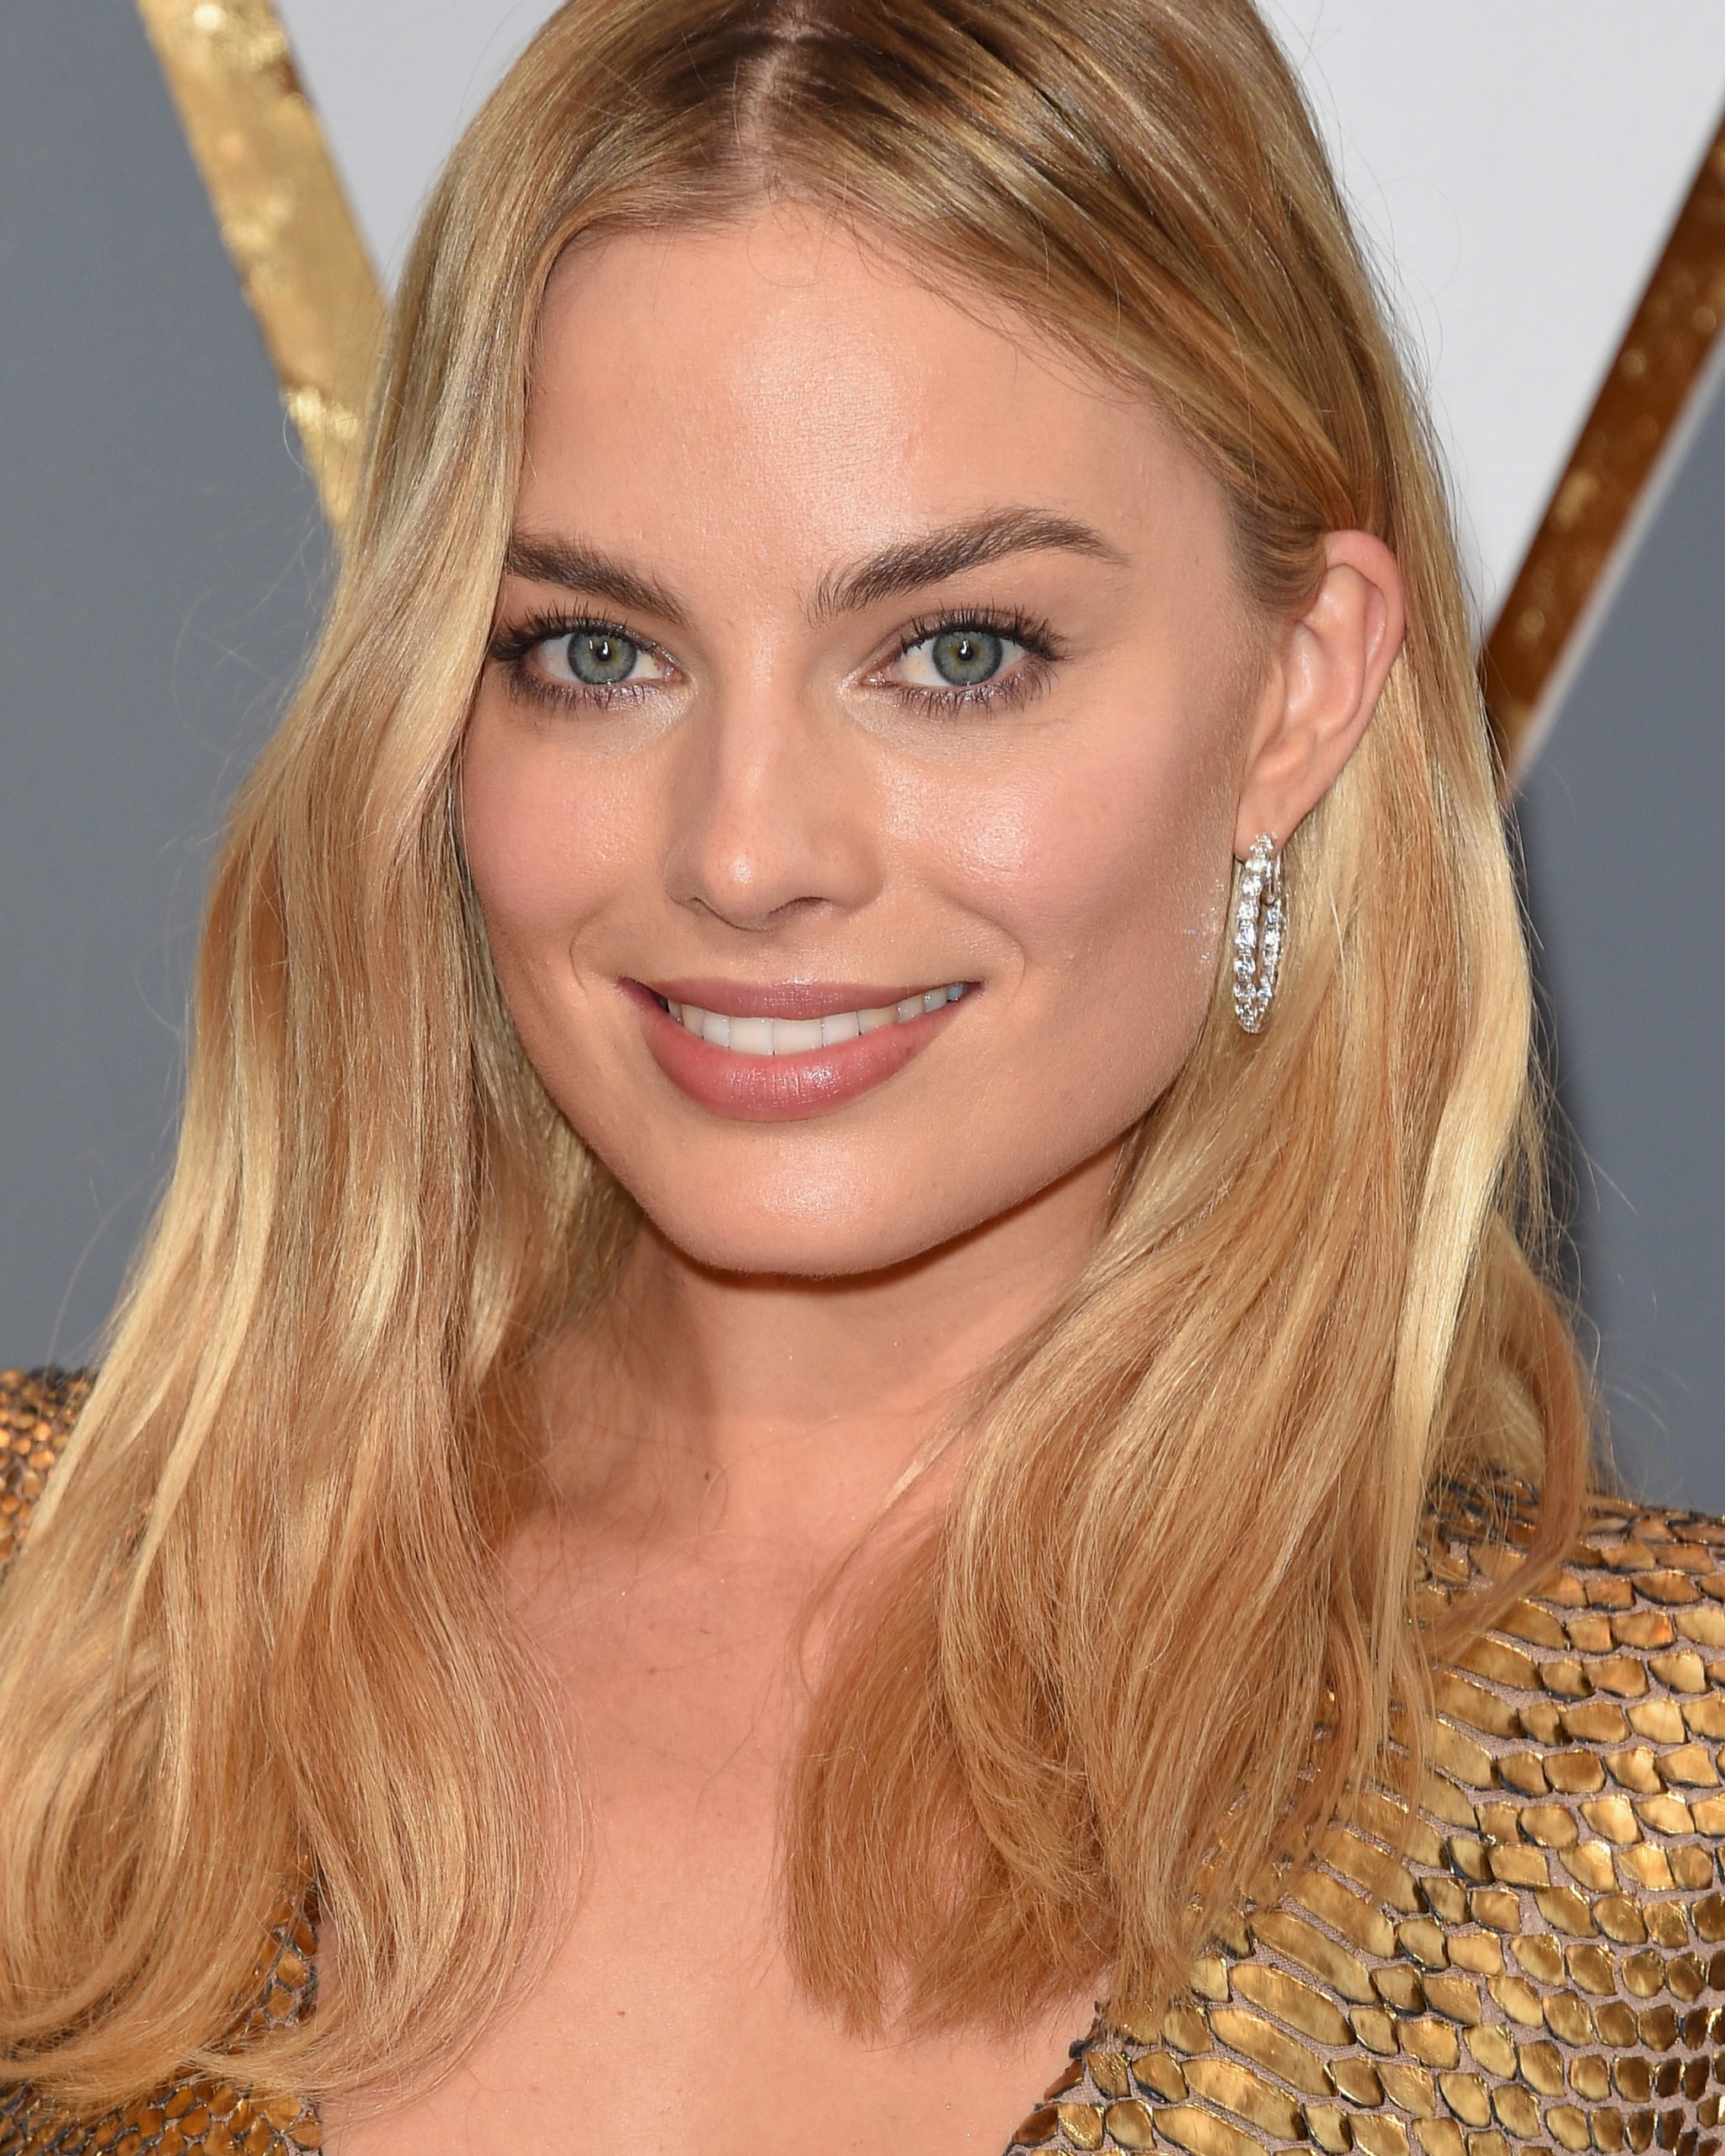 Diamond hoop earrings in white gold worn by Margot Robbie at the 2016 Academy Awards